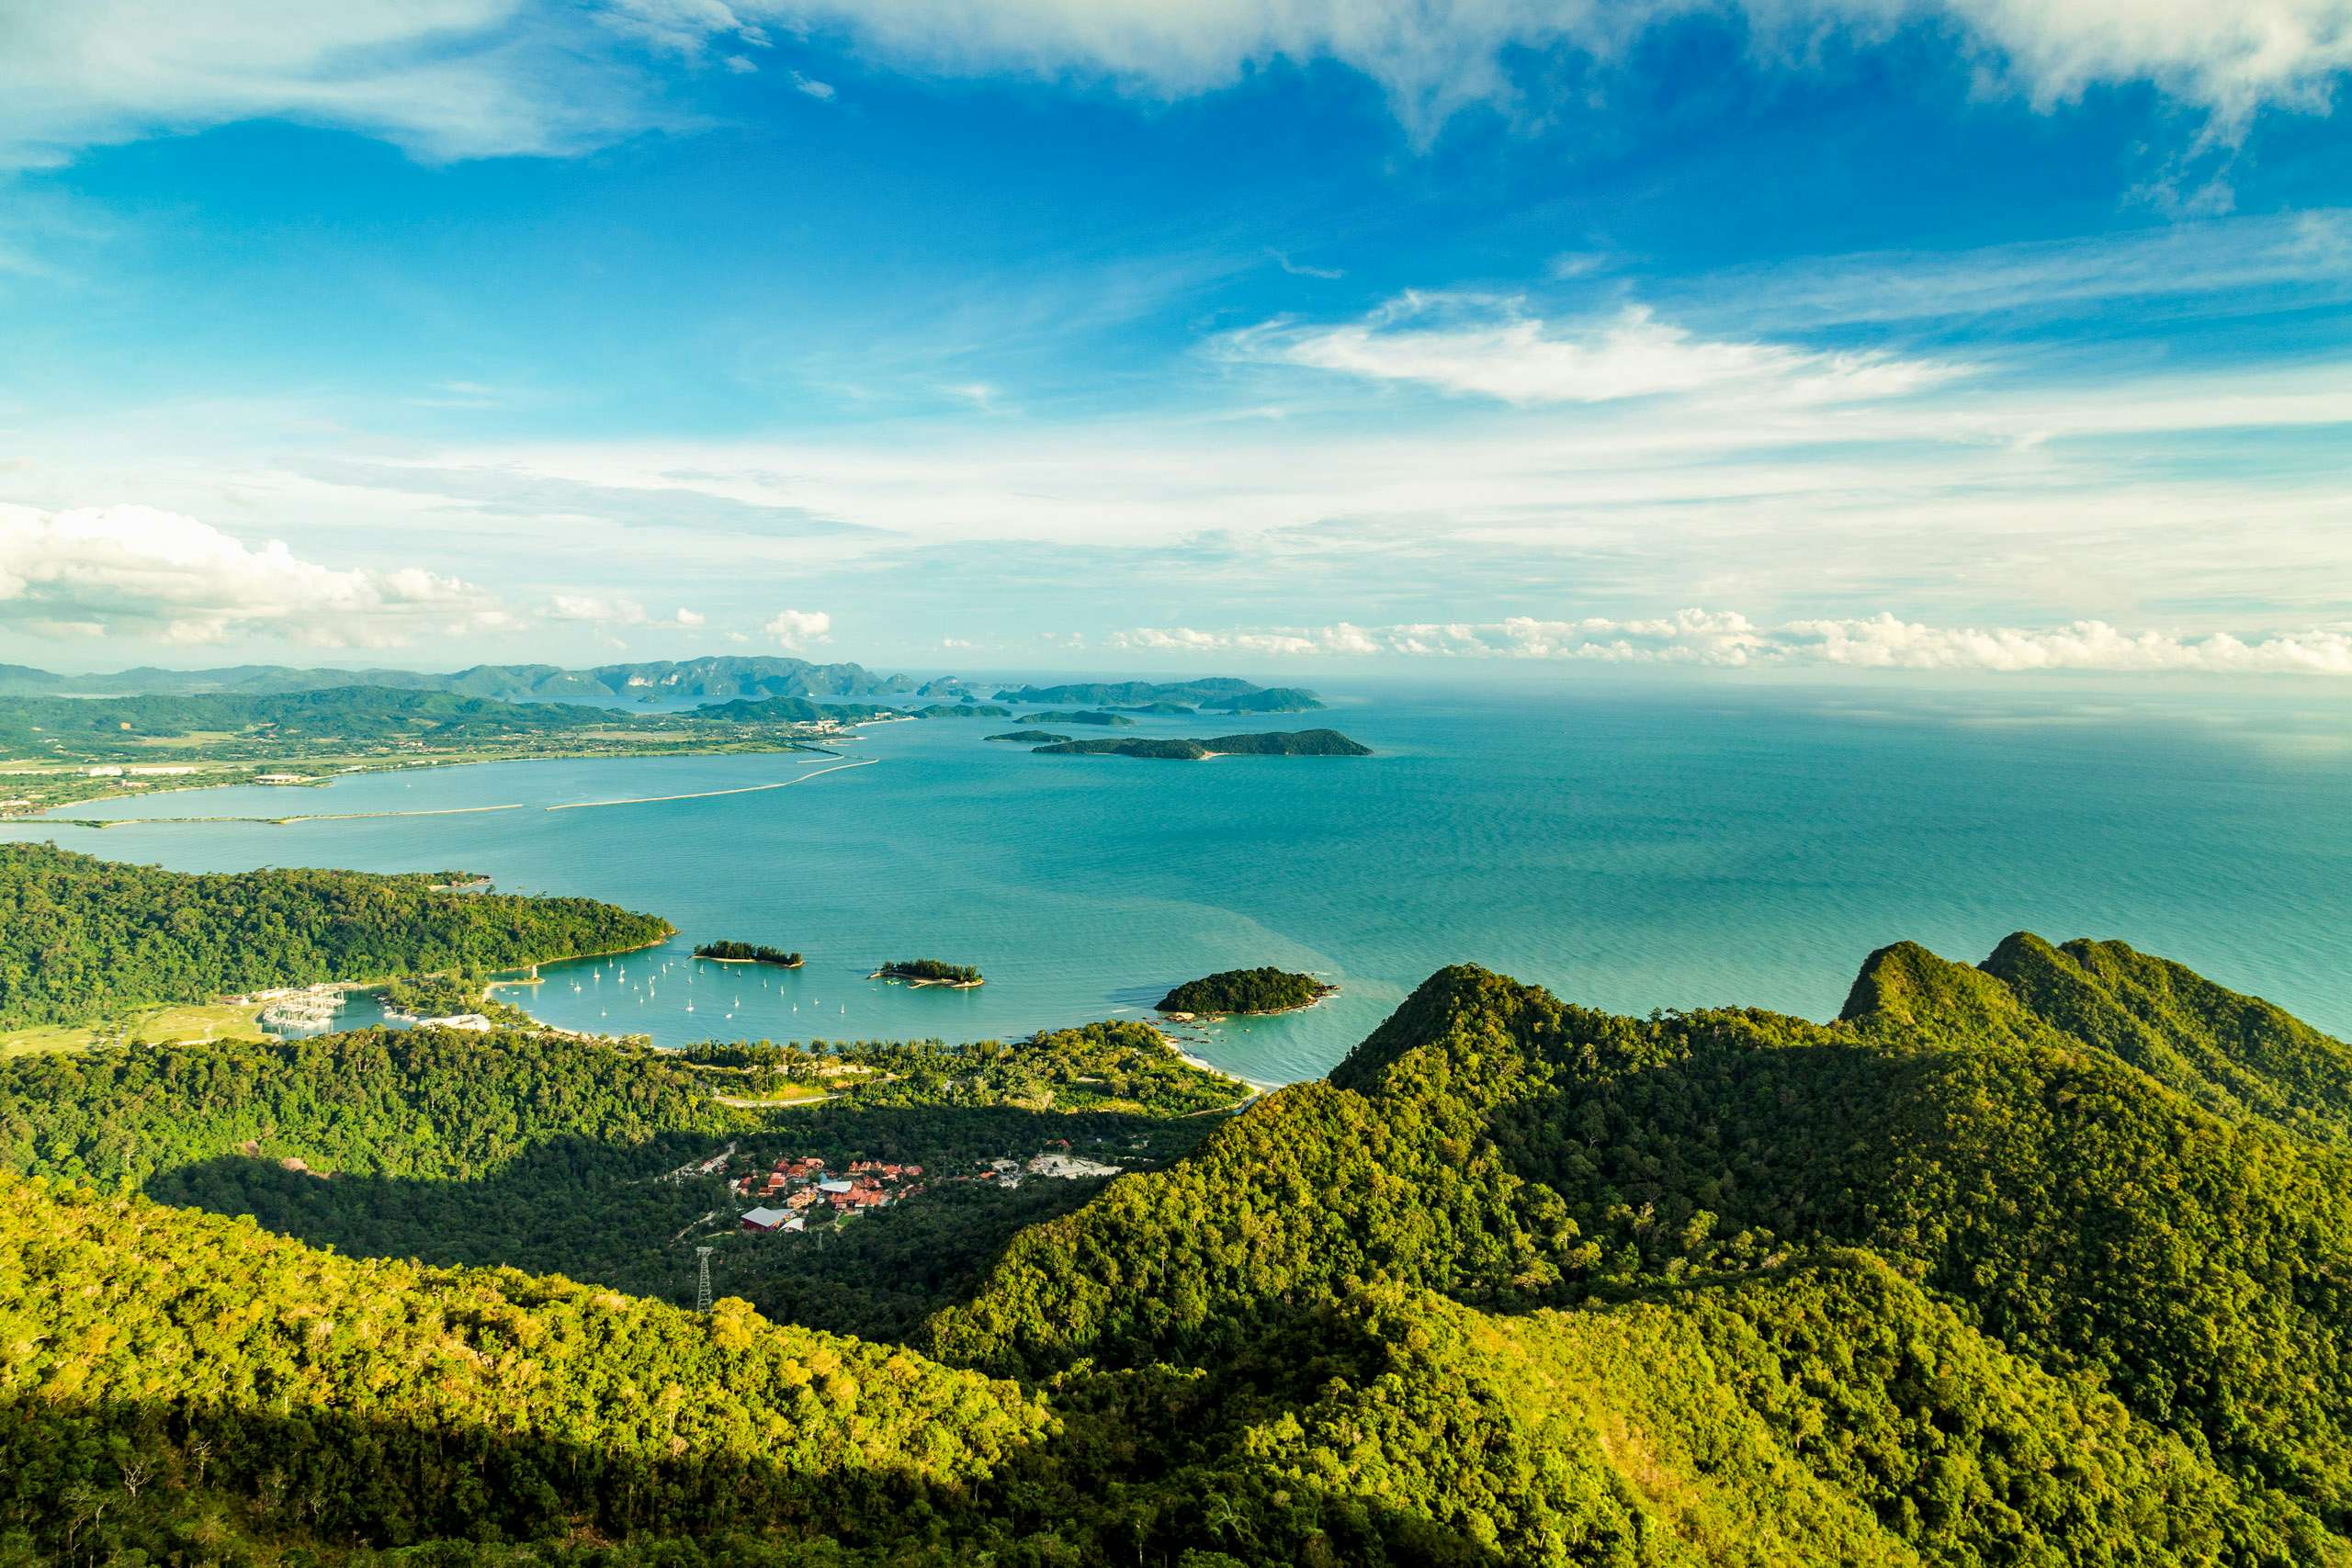 Malaysia Yacht Charter - Langkawi Yacht Charter View of tropical island Langkawi in Malaysia, covered with tropical forests. Aerial view on the bay, marina and archipelago of smaller islands in Andaman sea